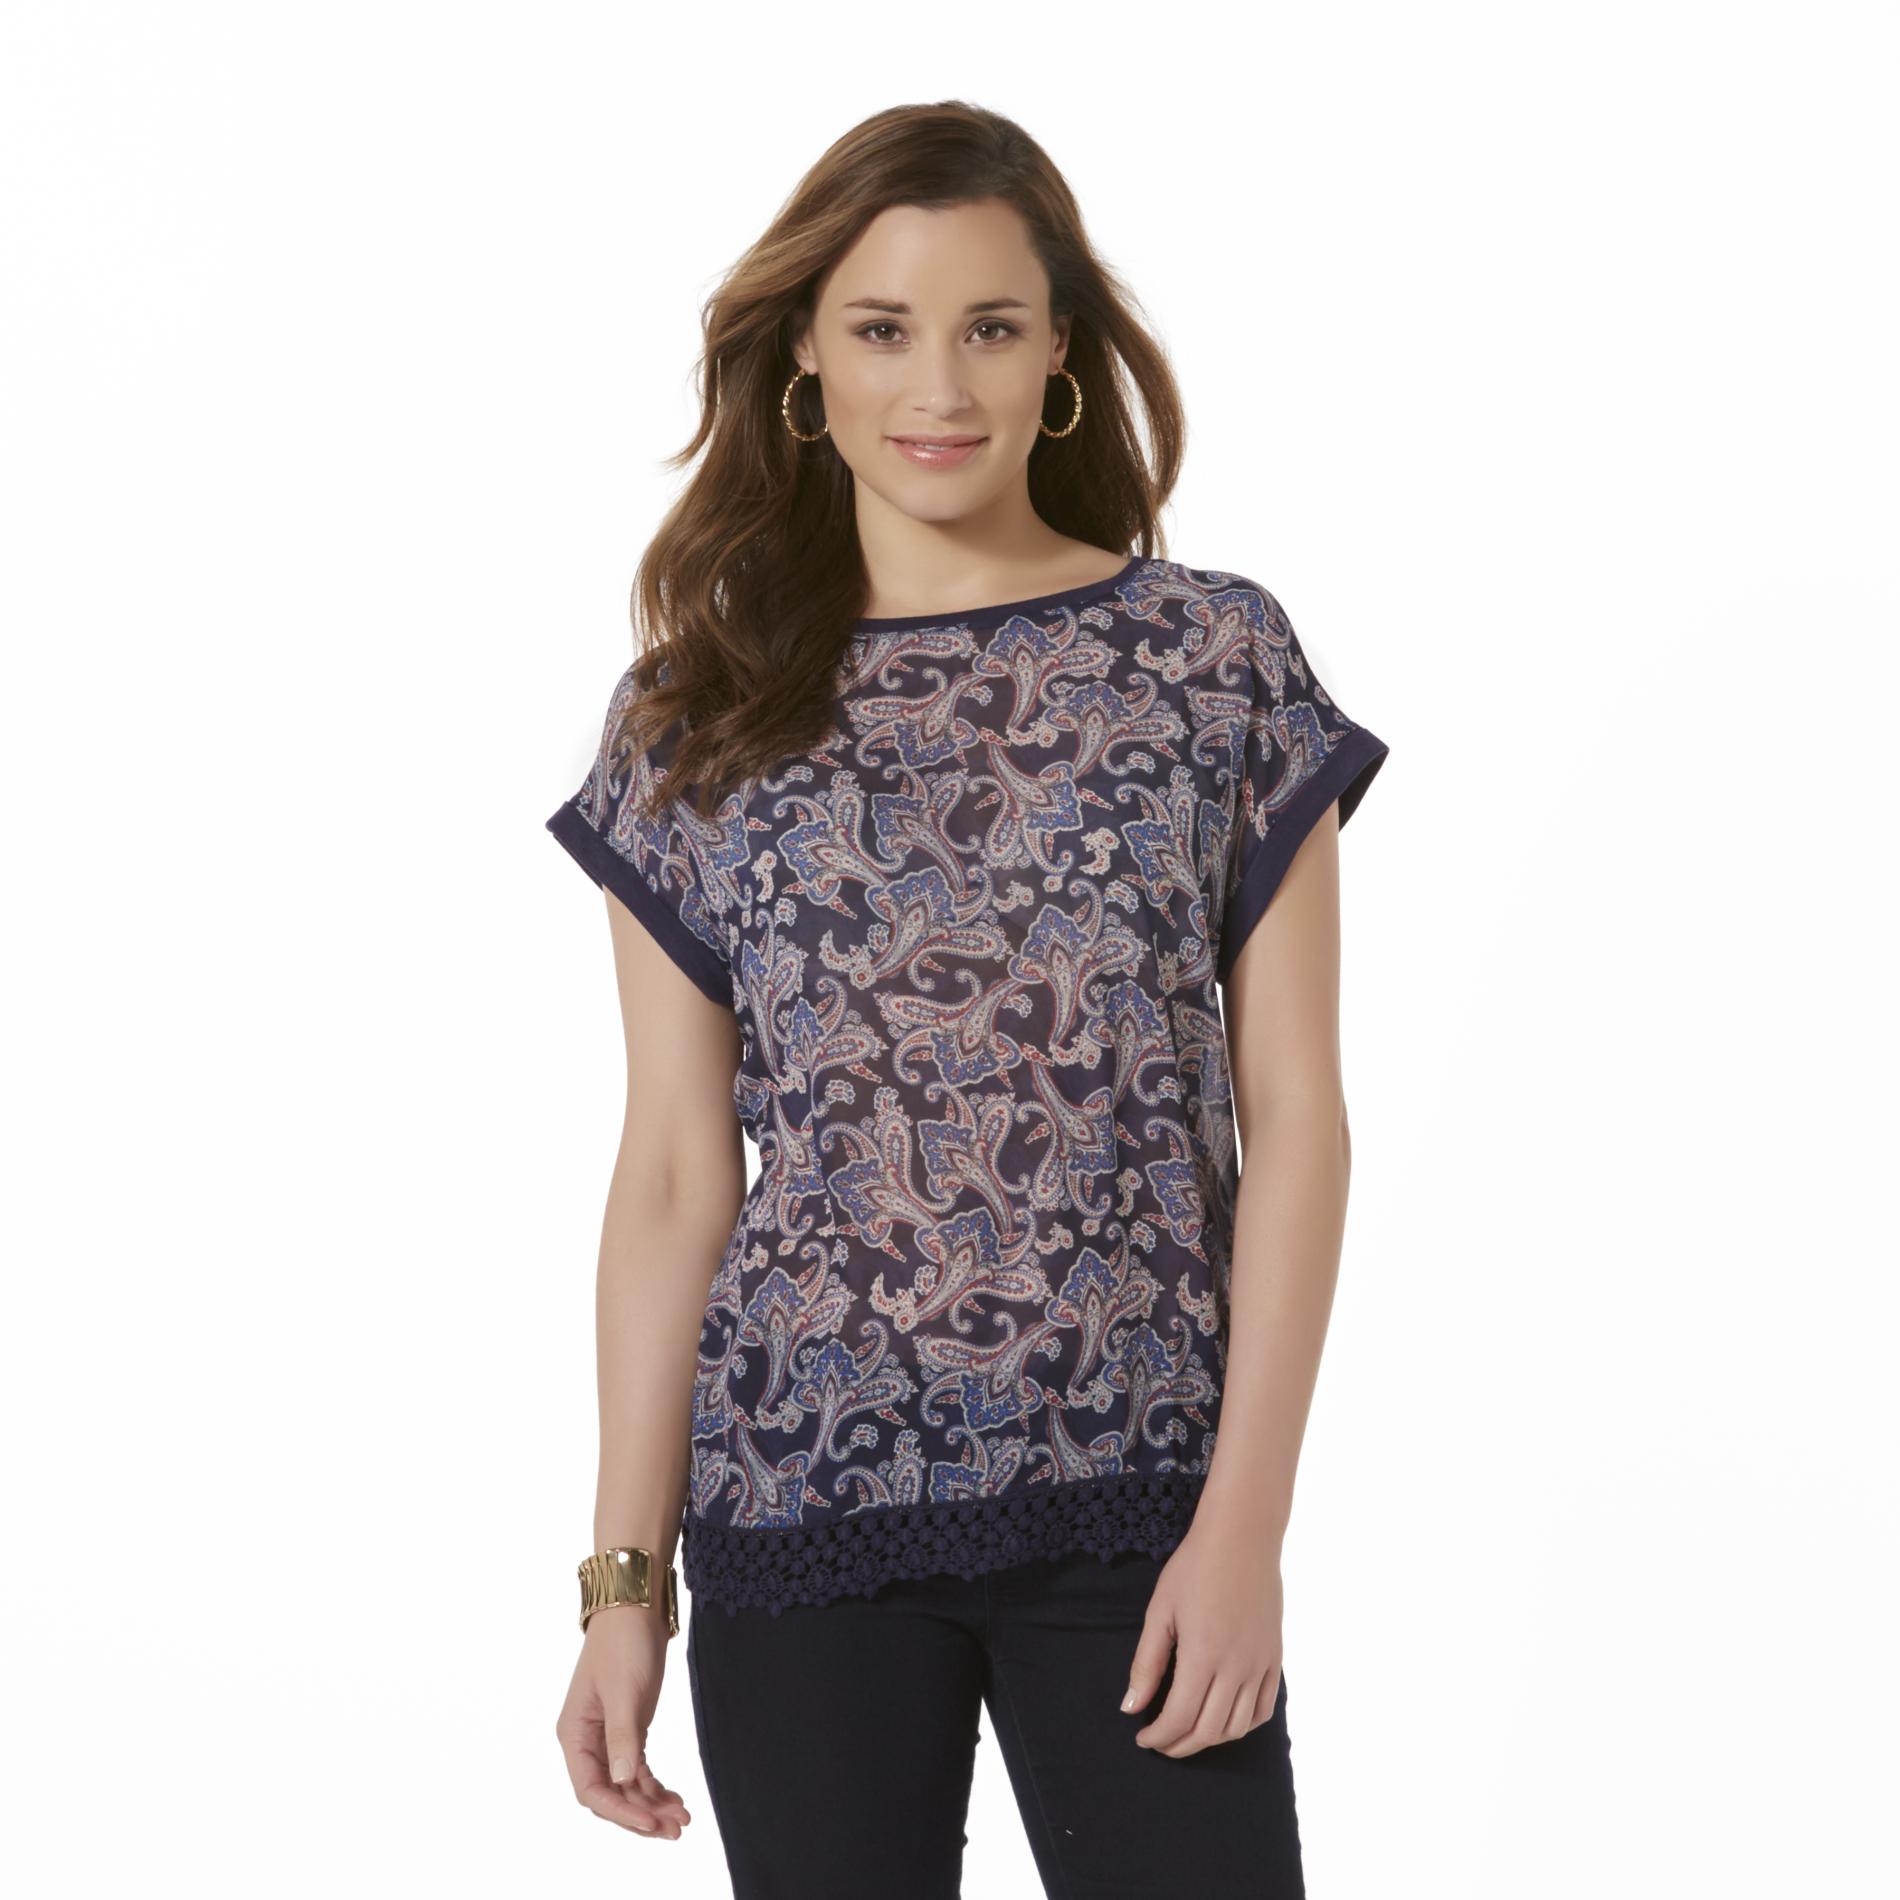 Attention Women's Mixed Media Top - Paisley